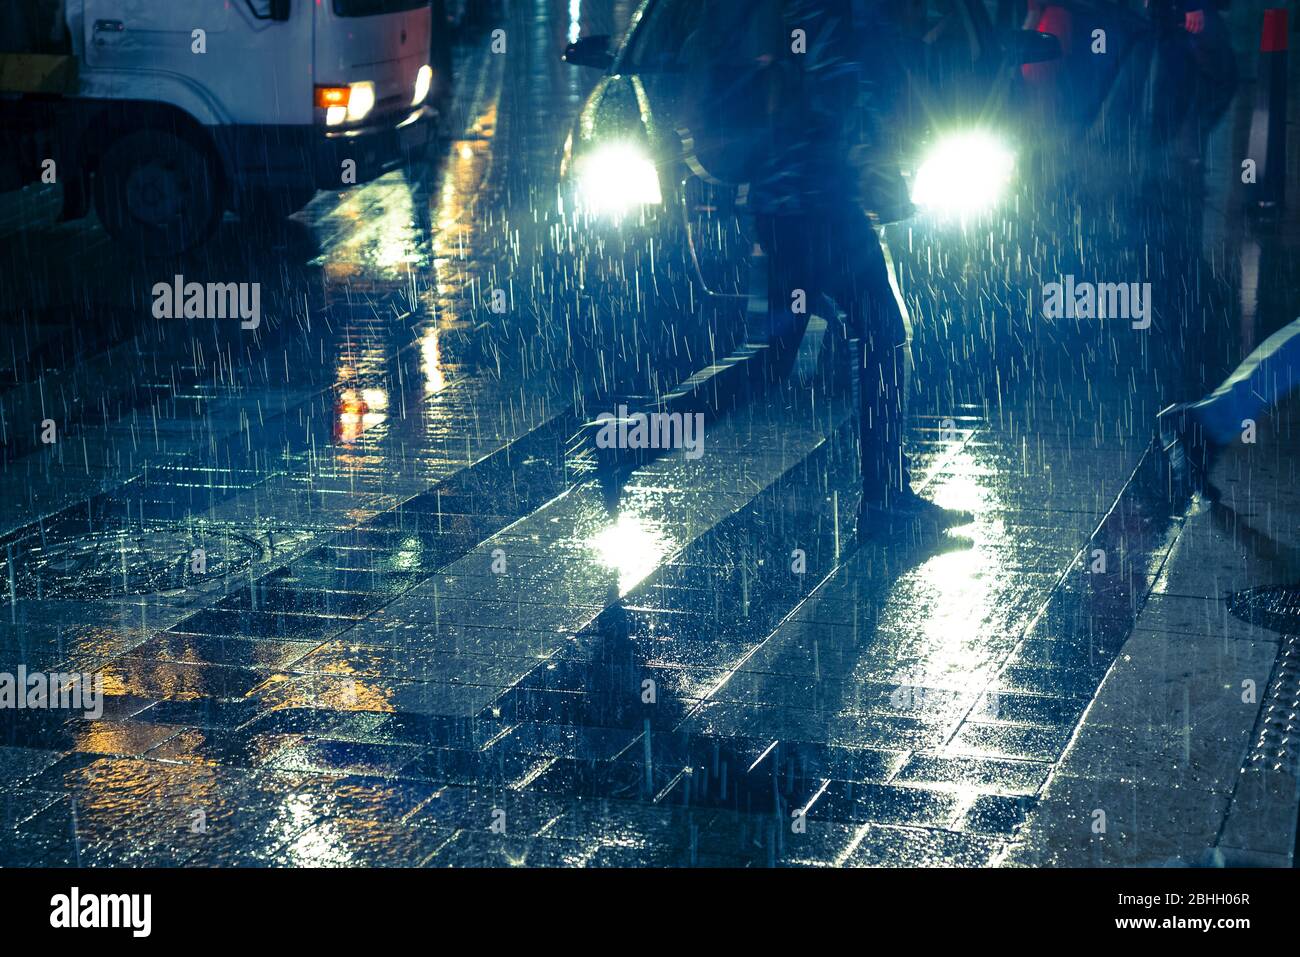 Legs of running people crossing the road against car headlight in the rain Stock Photo